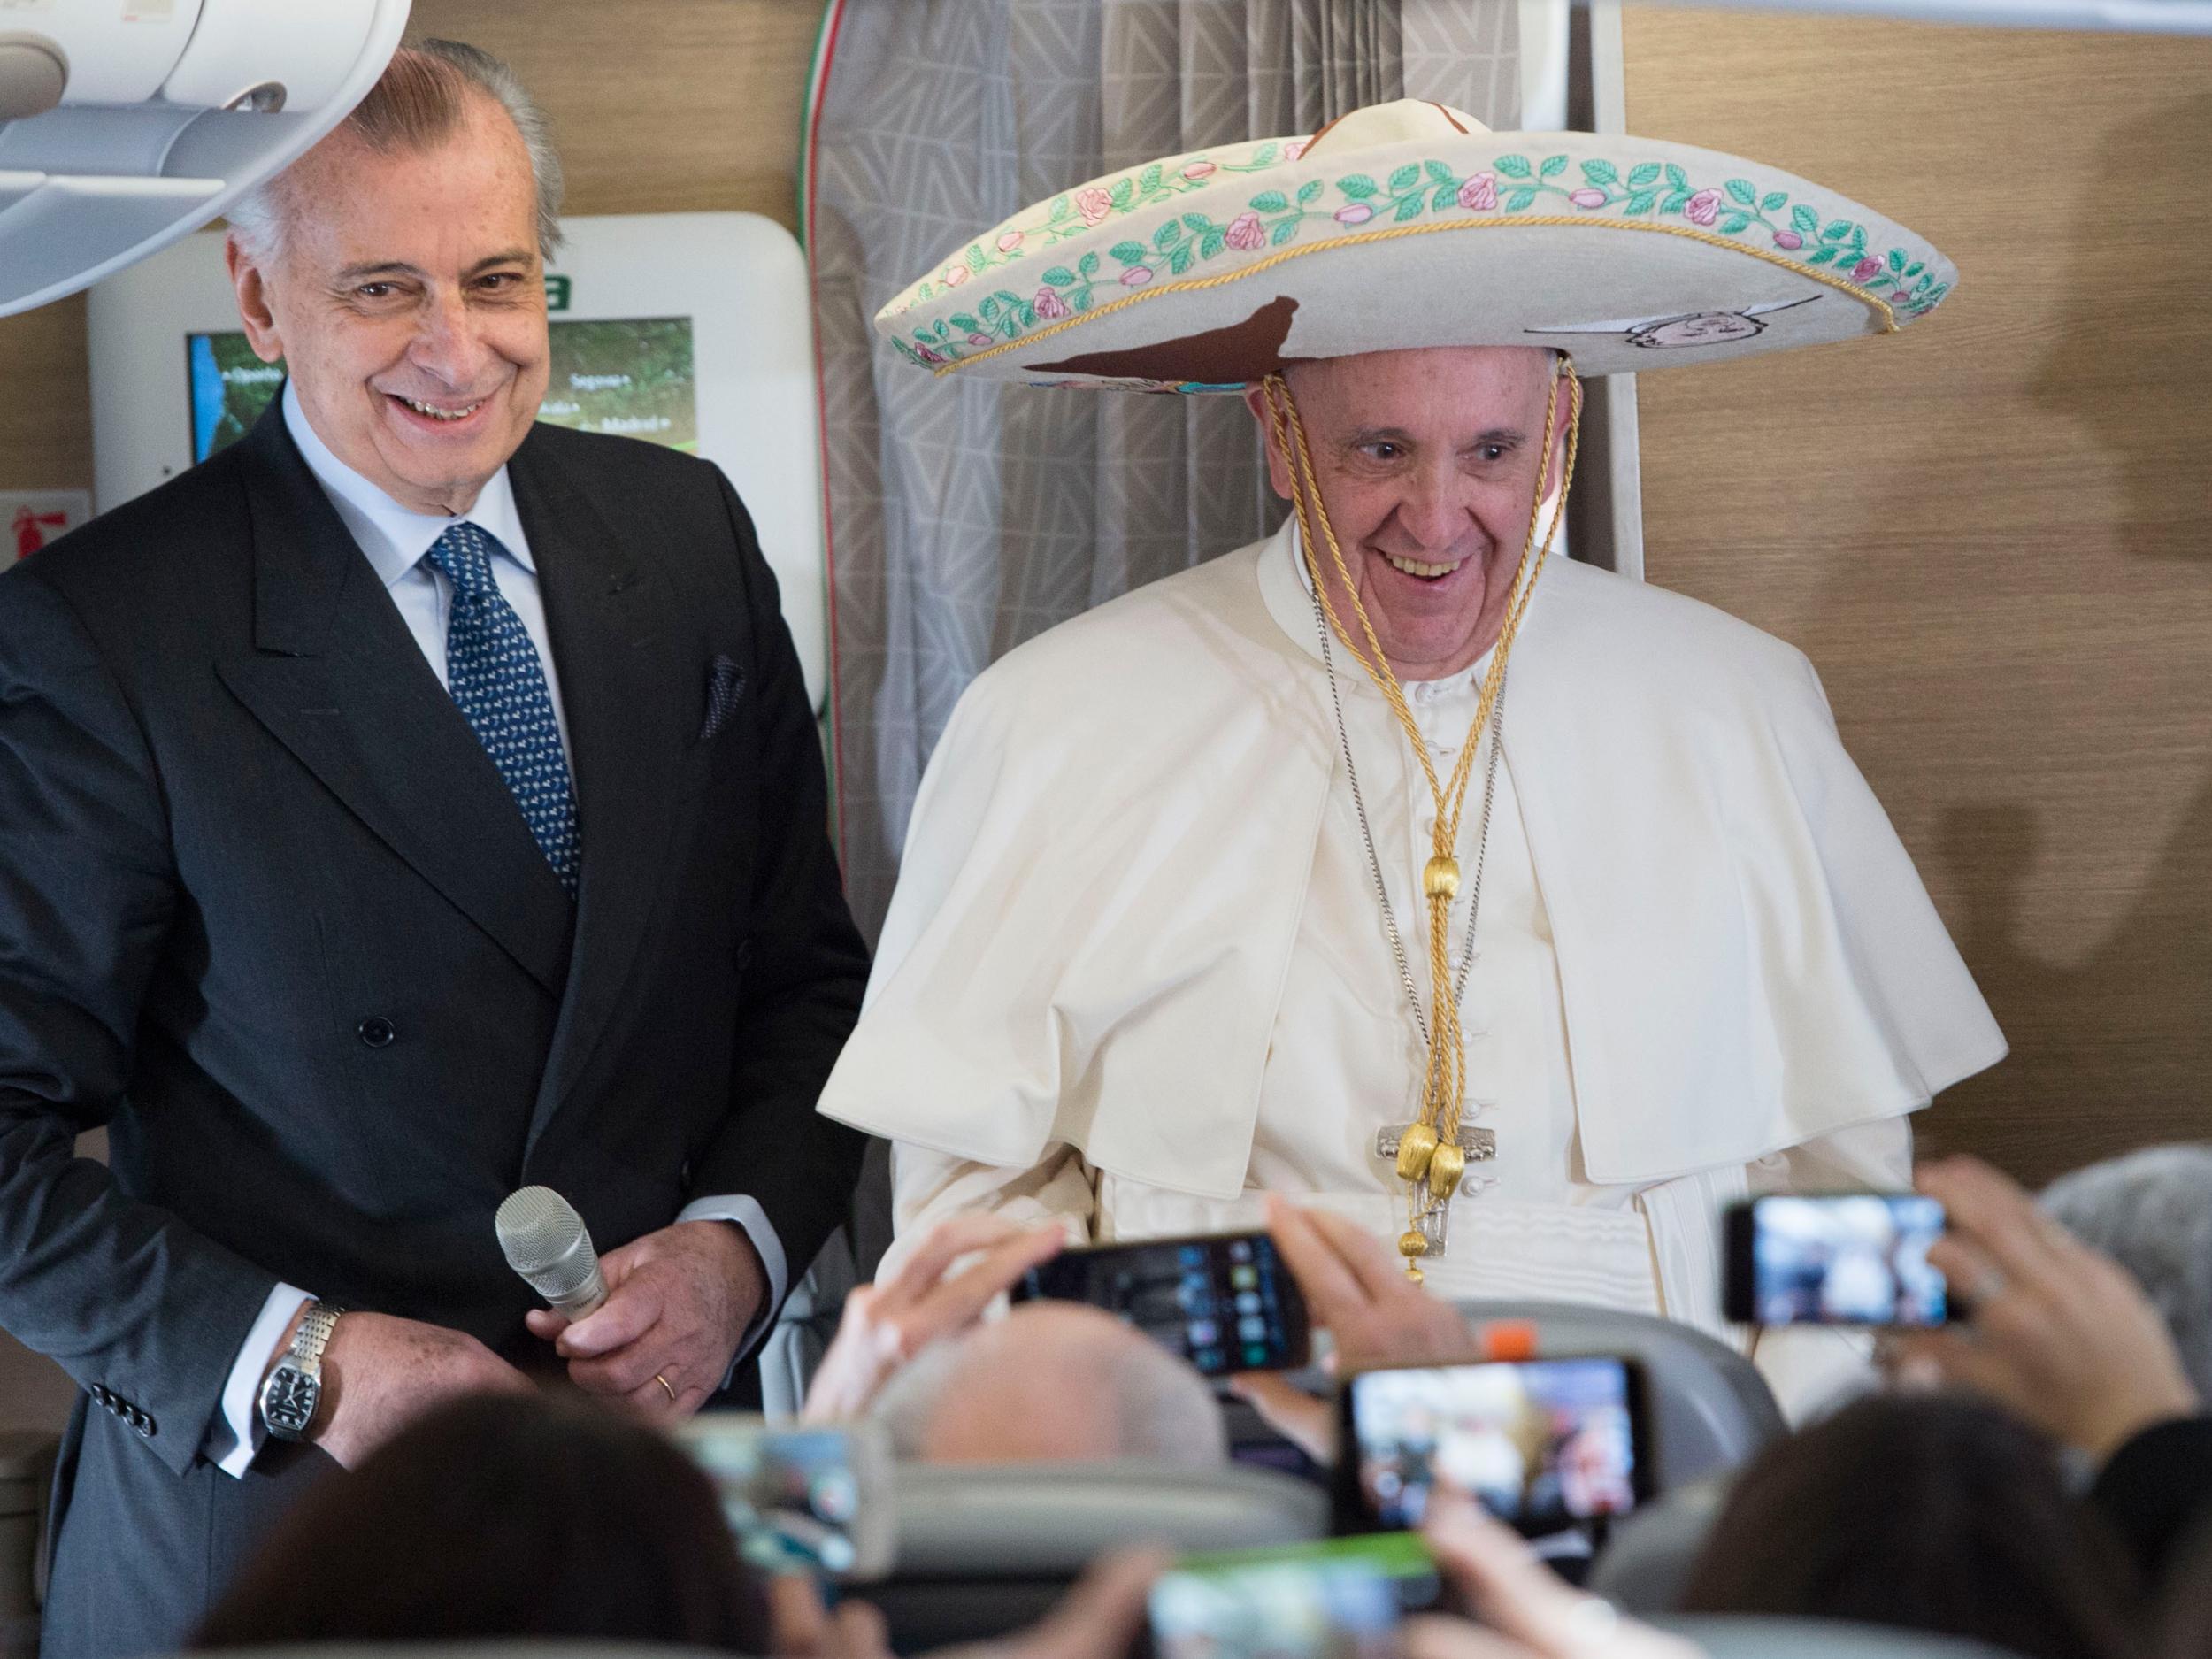 Pope Francis was gifted a traditional Mexican hat by a journalist ahead of his visit to the country